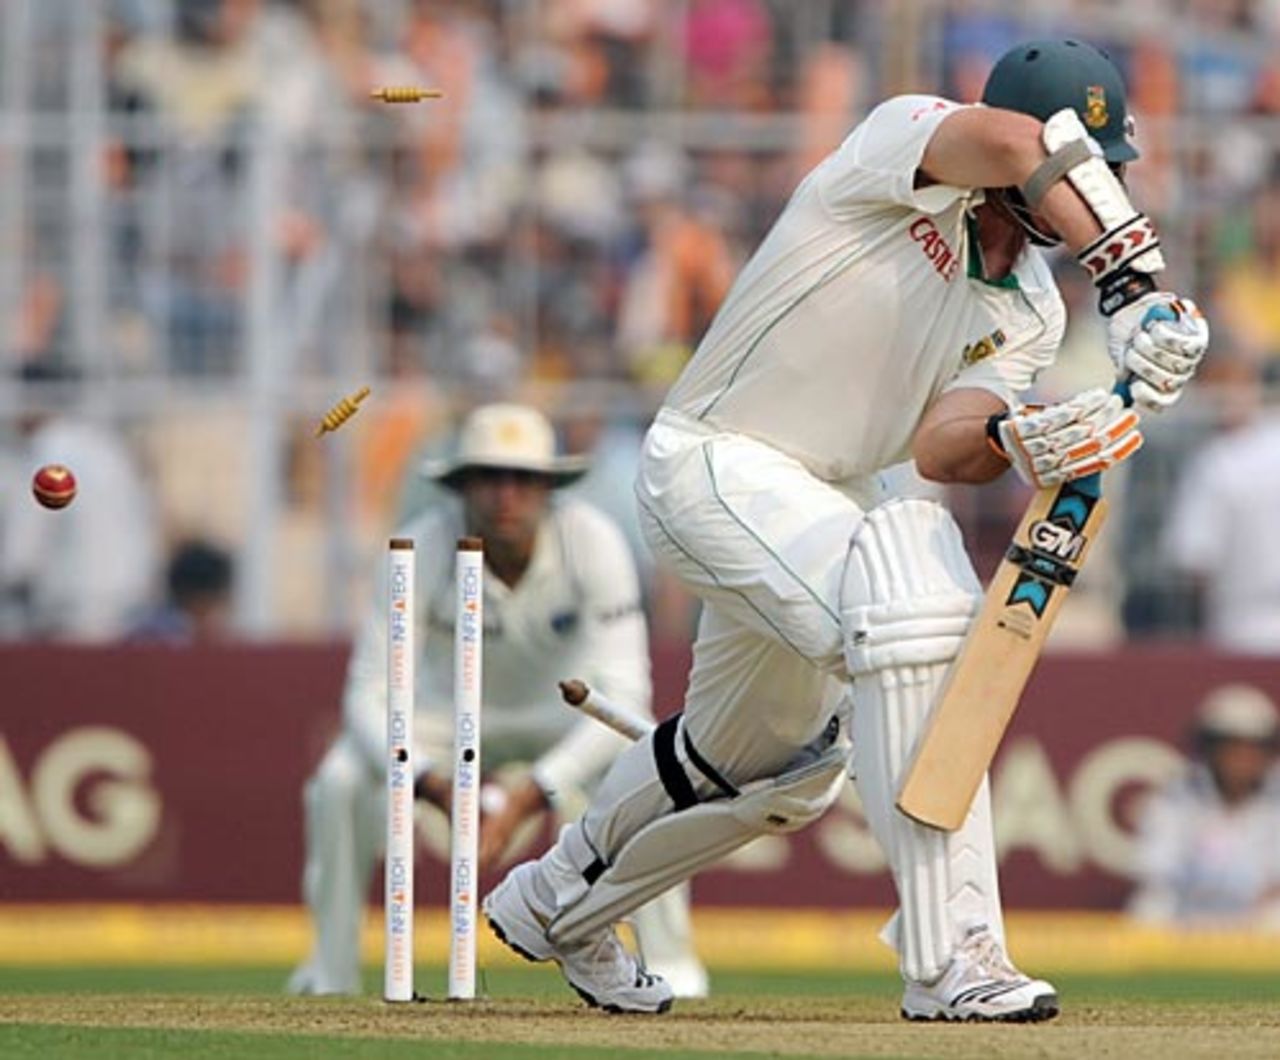 Graeme Smith is bowled between bat and pad, India v South Africa, 2nd Test, Kolkata, 1st day, February 14, 2010